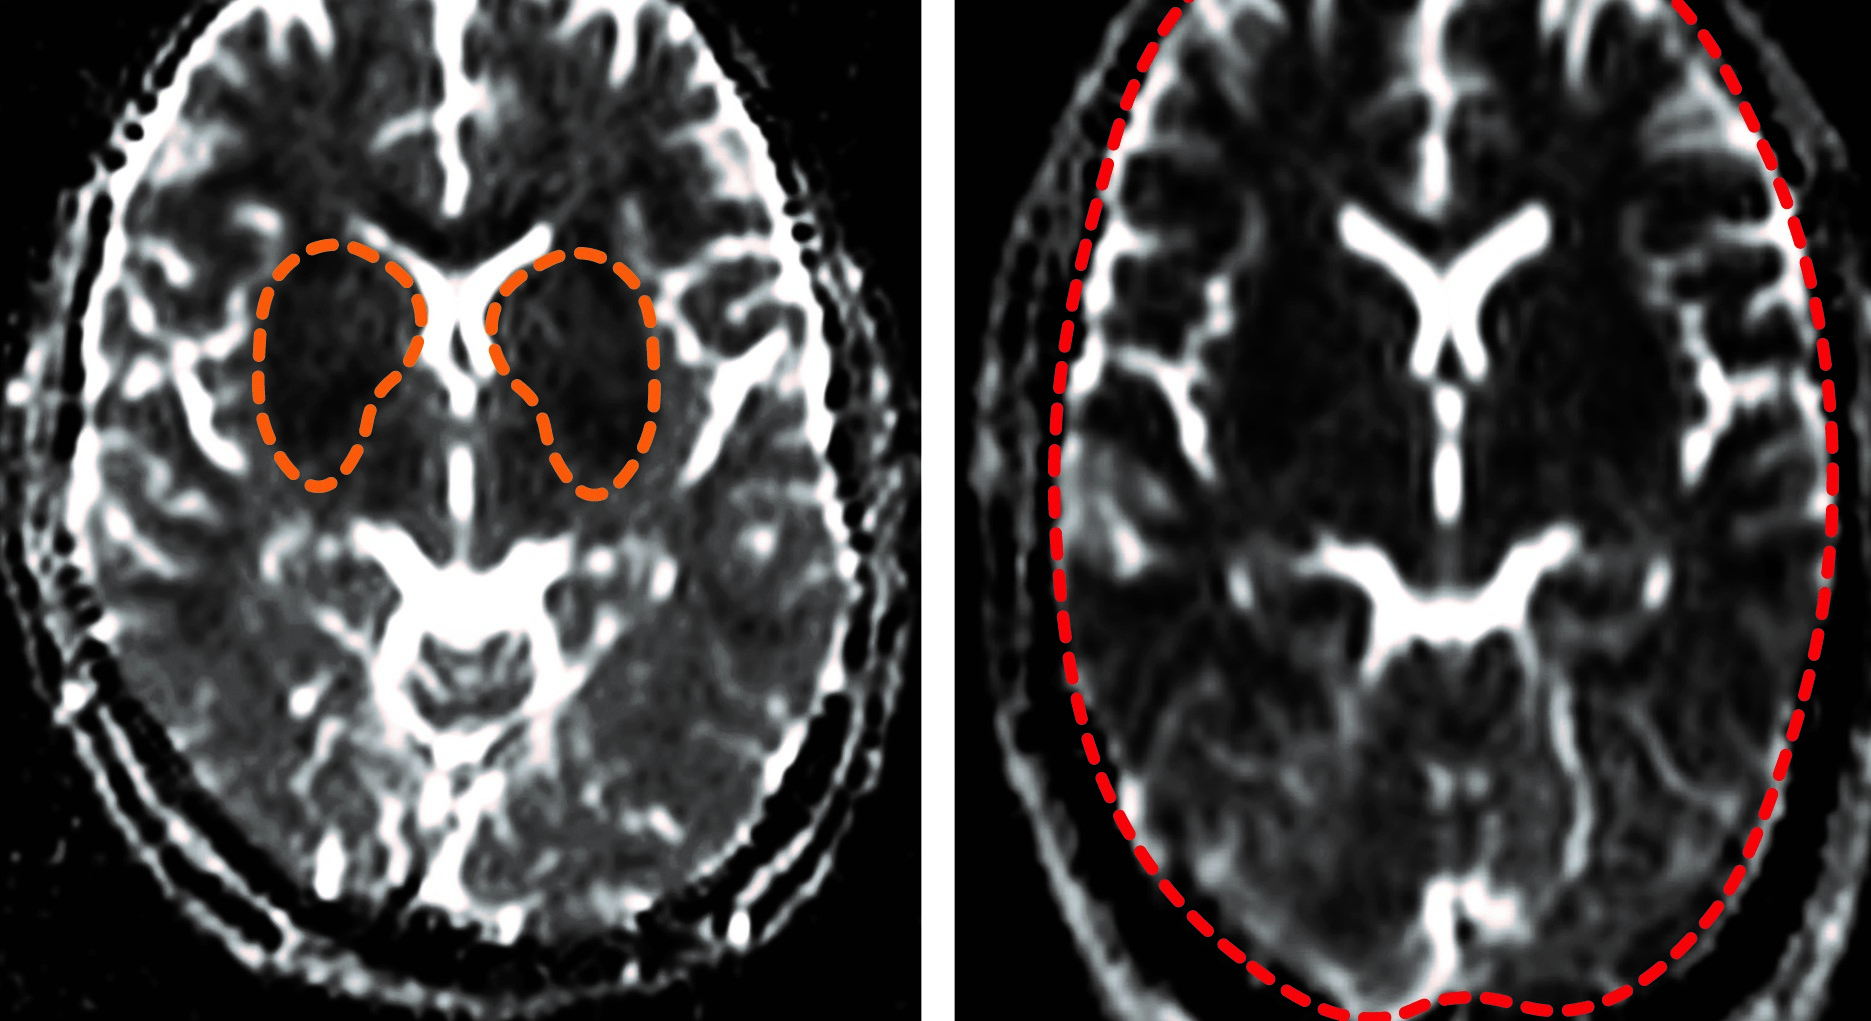 Transient oxygen deprivation is seen in the basal ganglia part of the brain in adults with non-fatal cerebral malaria (darker areas highlighted, left). The authors showed for the first time that fatal cerebral malaria in adults is associated with a profound lack of oxygen seen in the whole brain (dark areas throughout the organ, right). Credit:https://doi.org/10.1093/cid/ciaa1647 - Clinical Infectious Diseases 